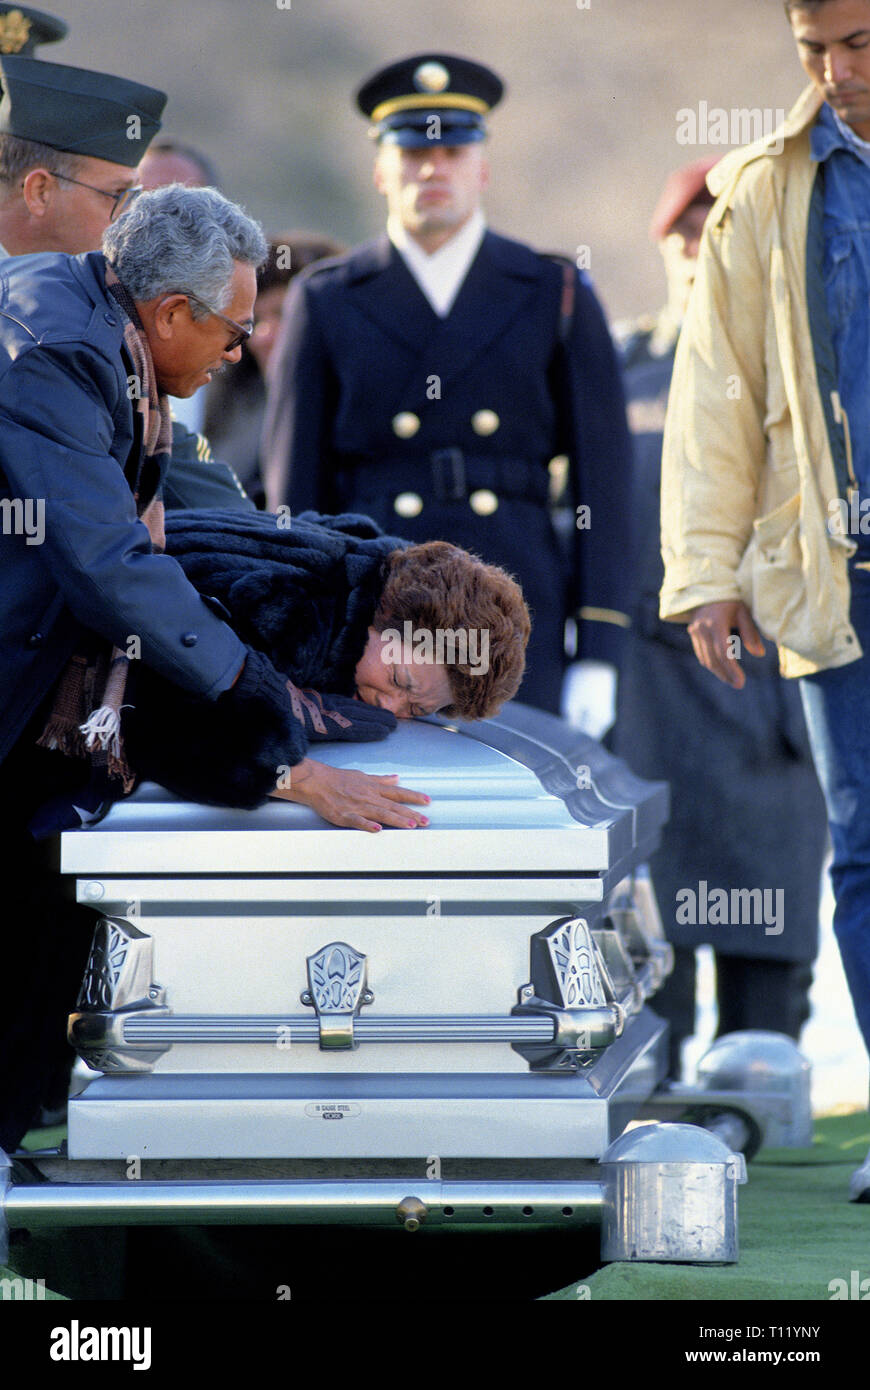 Arlington, Virginia 12-28-1989 The mother of Alejandro L. Manriquelozano, Specialist, USA Ranger battalion, lies weeping over his casket during his funeral today at Arlington National Cemetery.  Specialist Alejandro L. Manriquelozano, 30, was buried with military honors, including 3 rifle volleys and the playing of taps, in snow-covered ground at Arlington within sight of the Capitol and Washington Monument. Credit: Mark Reinstein/MediaPunch Stock Photo